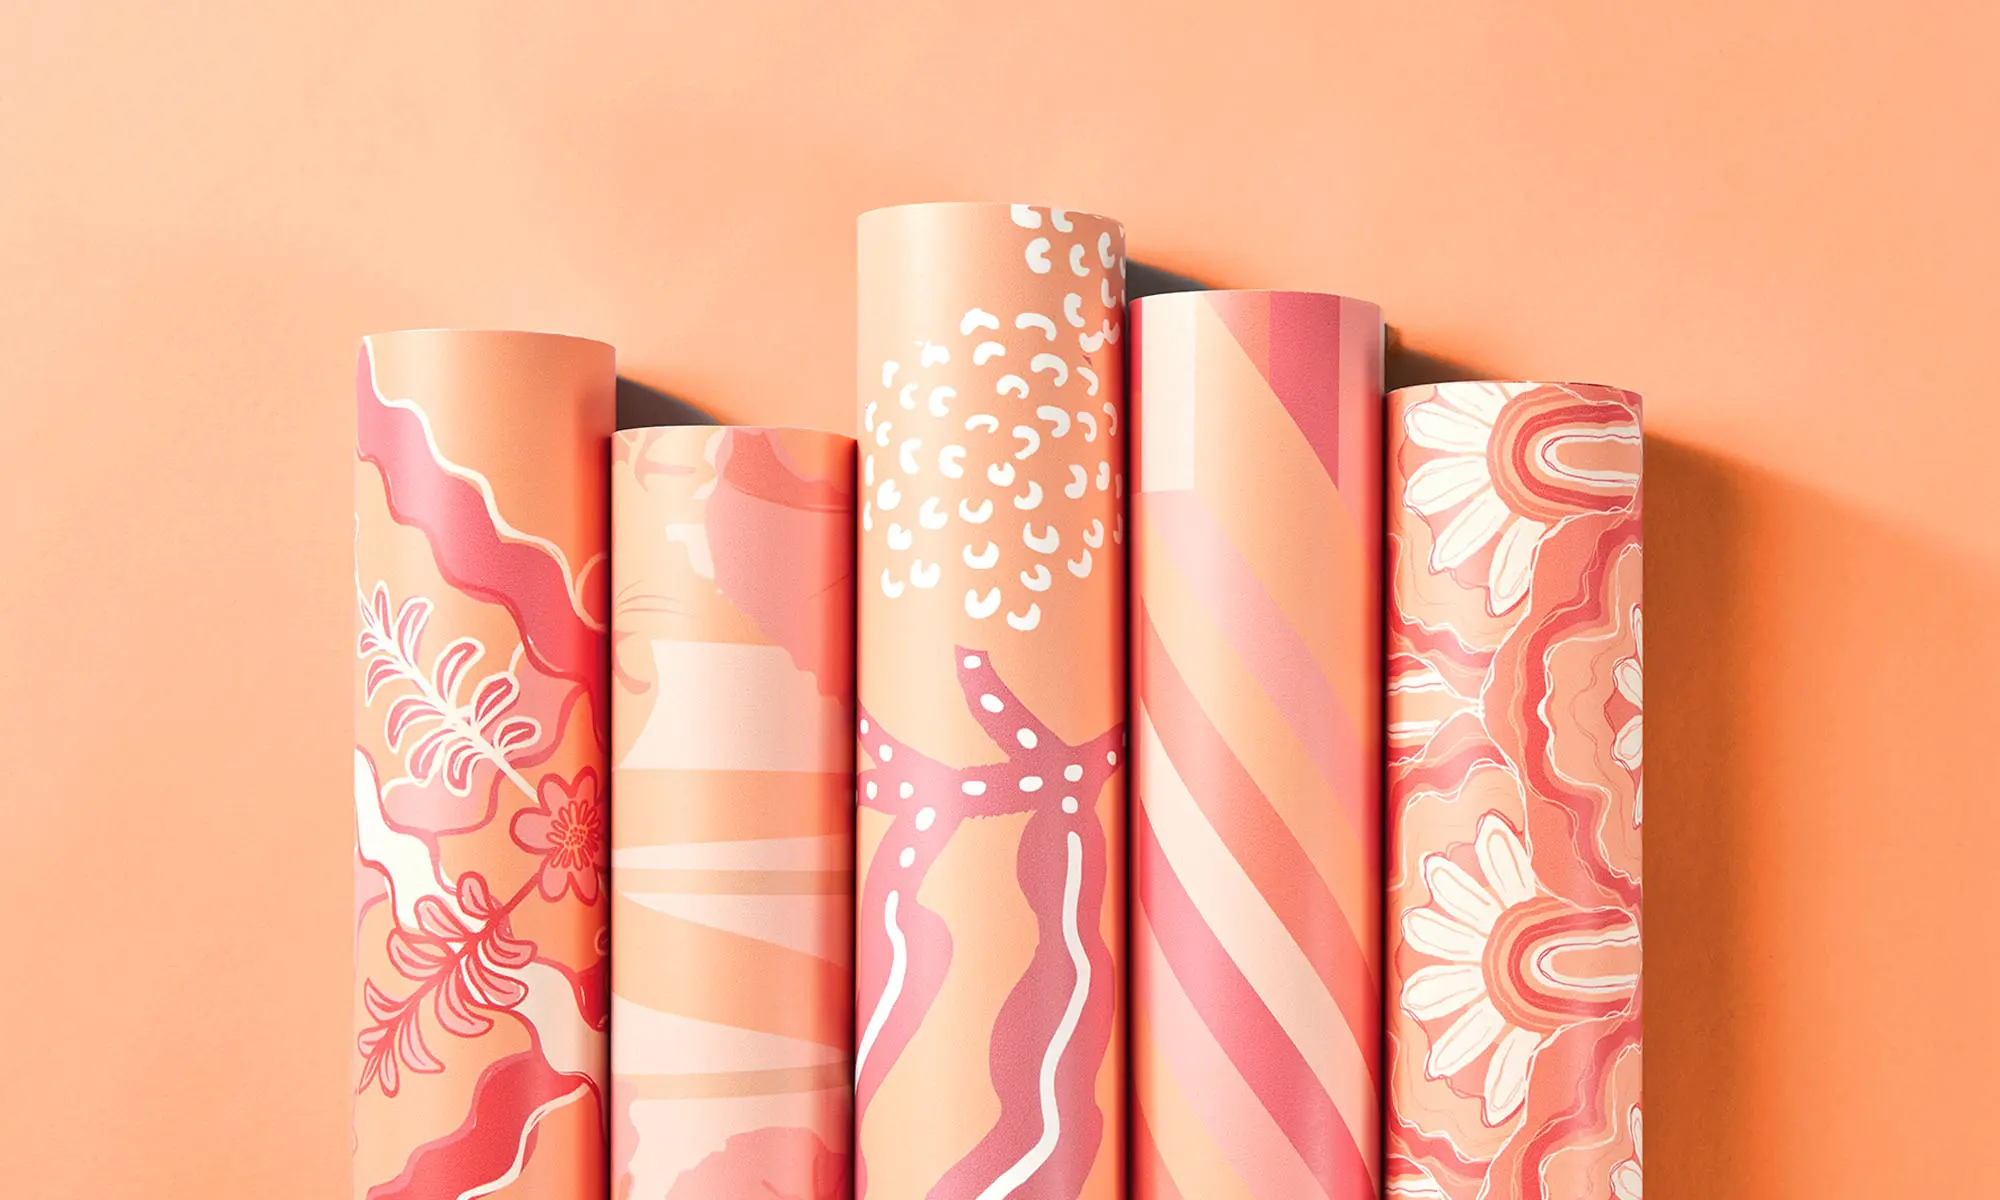 Five rolls of "Peach Fuzz" theme wallpaper with a peach background.